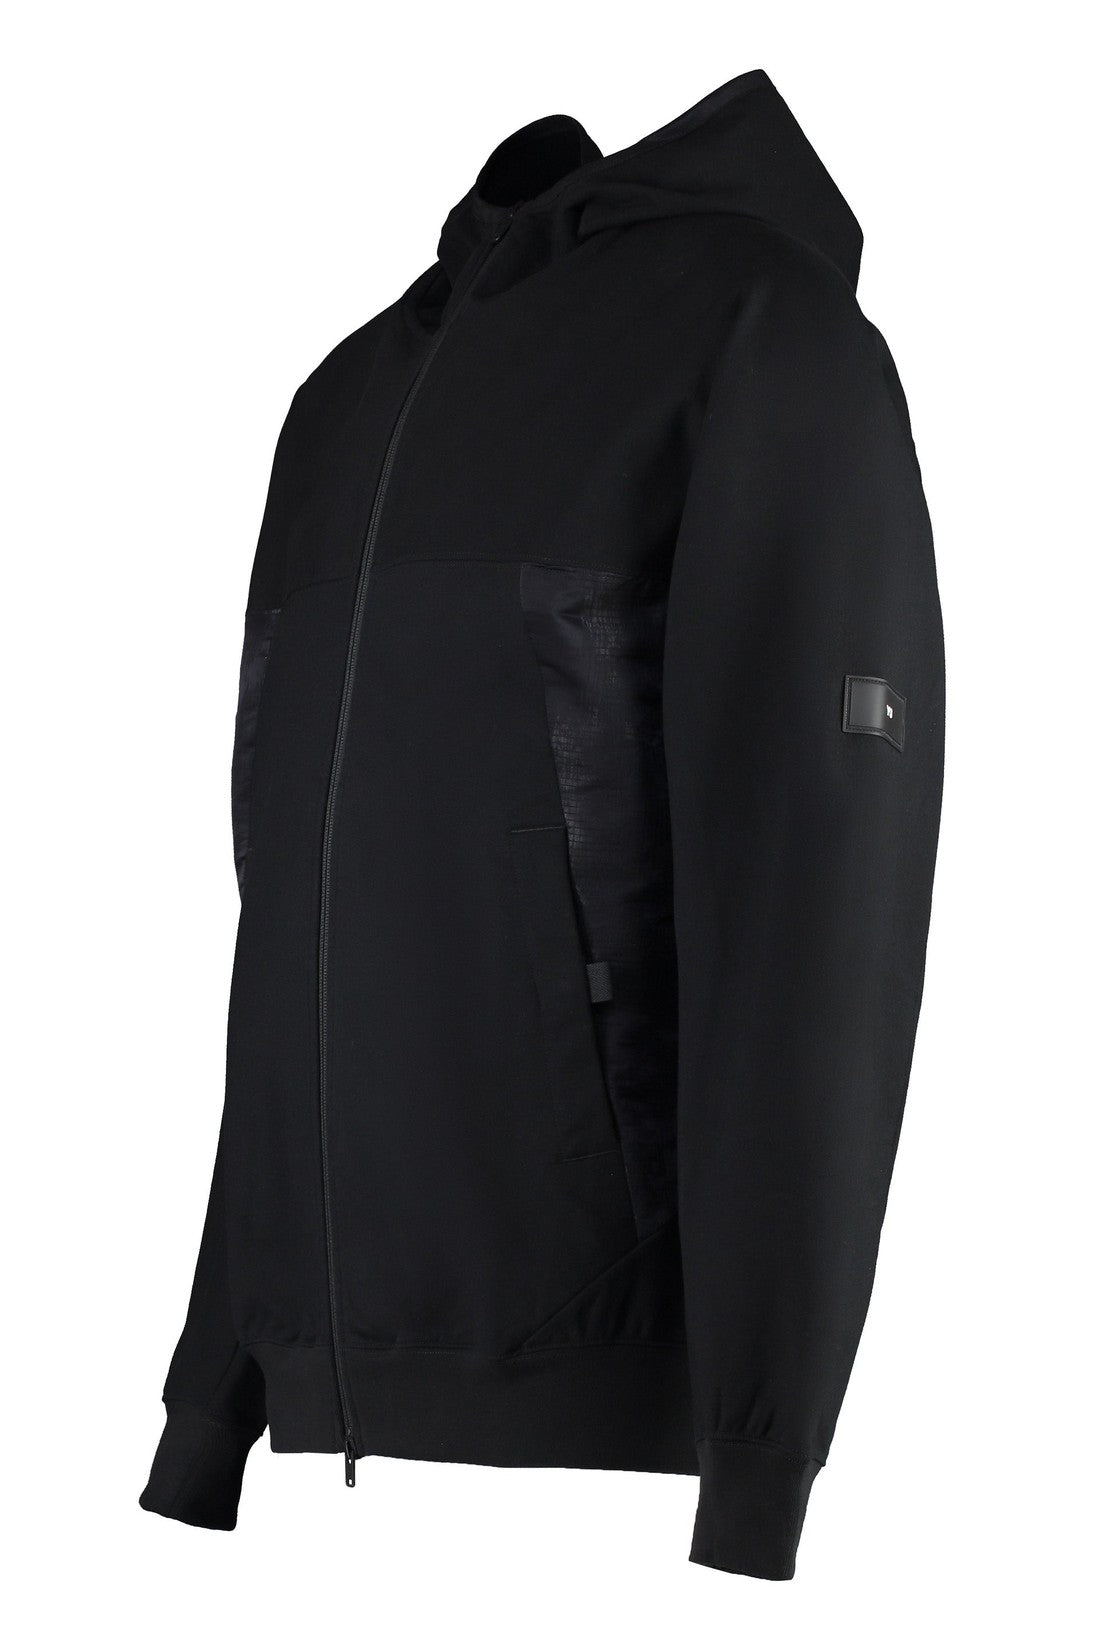 adidas Y-3-OUTLET-SALE-Terry Cotton full zip hoodie-ARCHIVIST